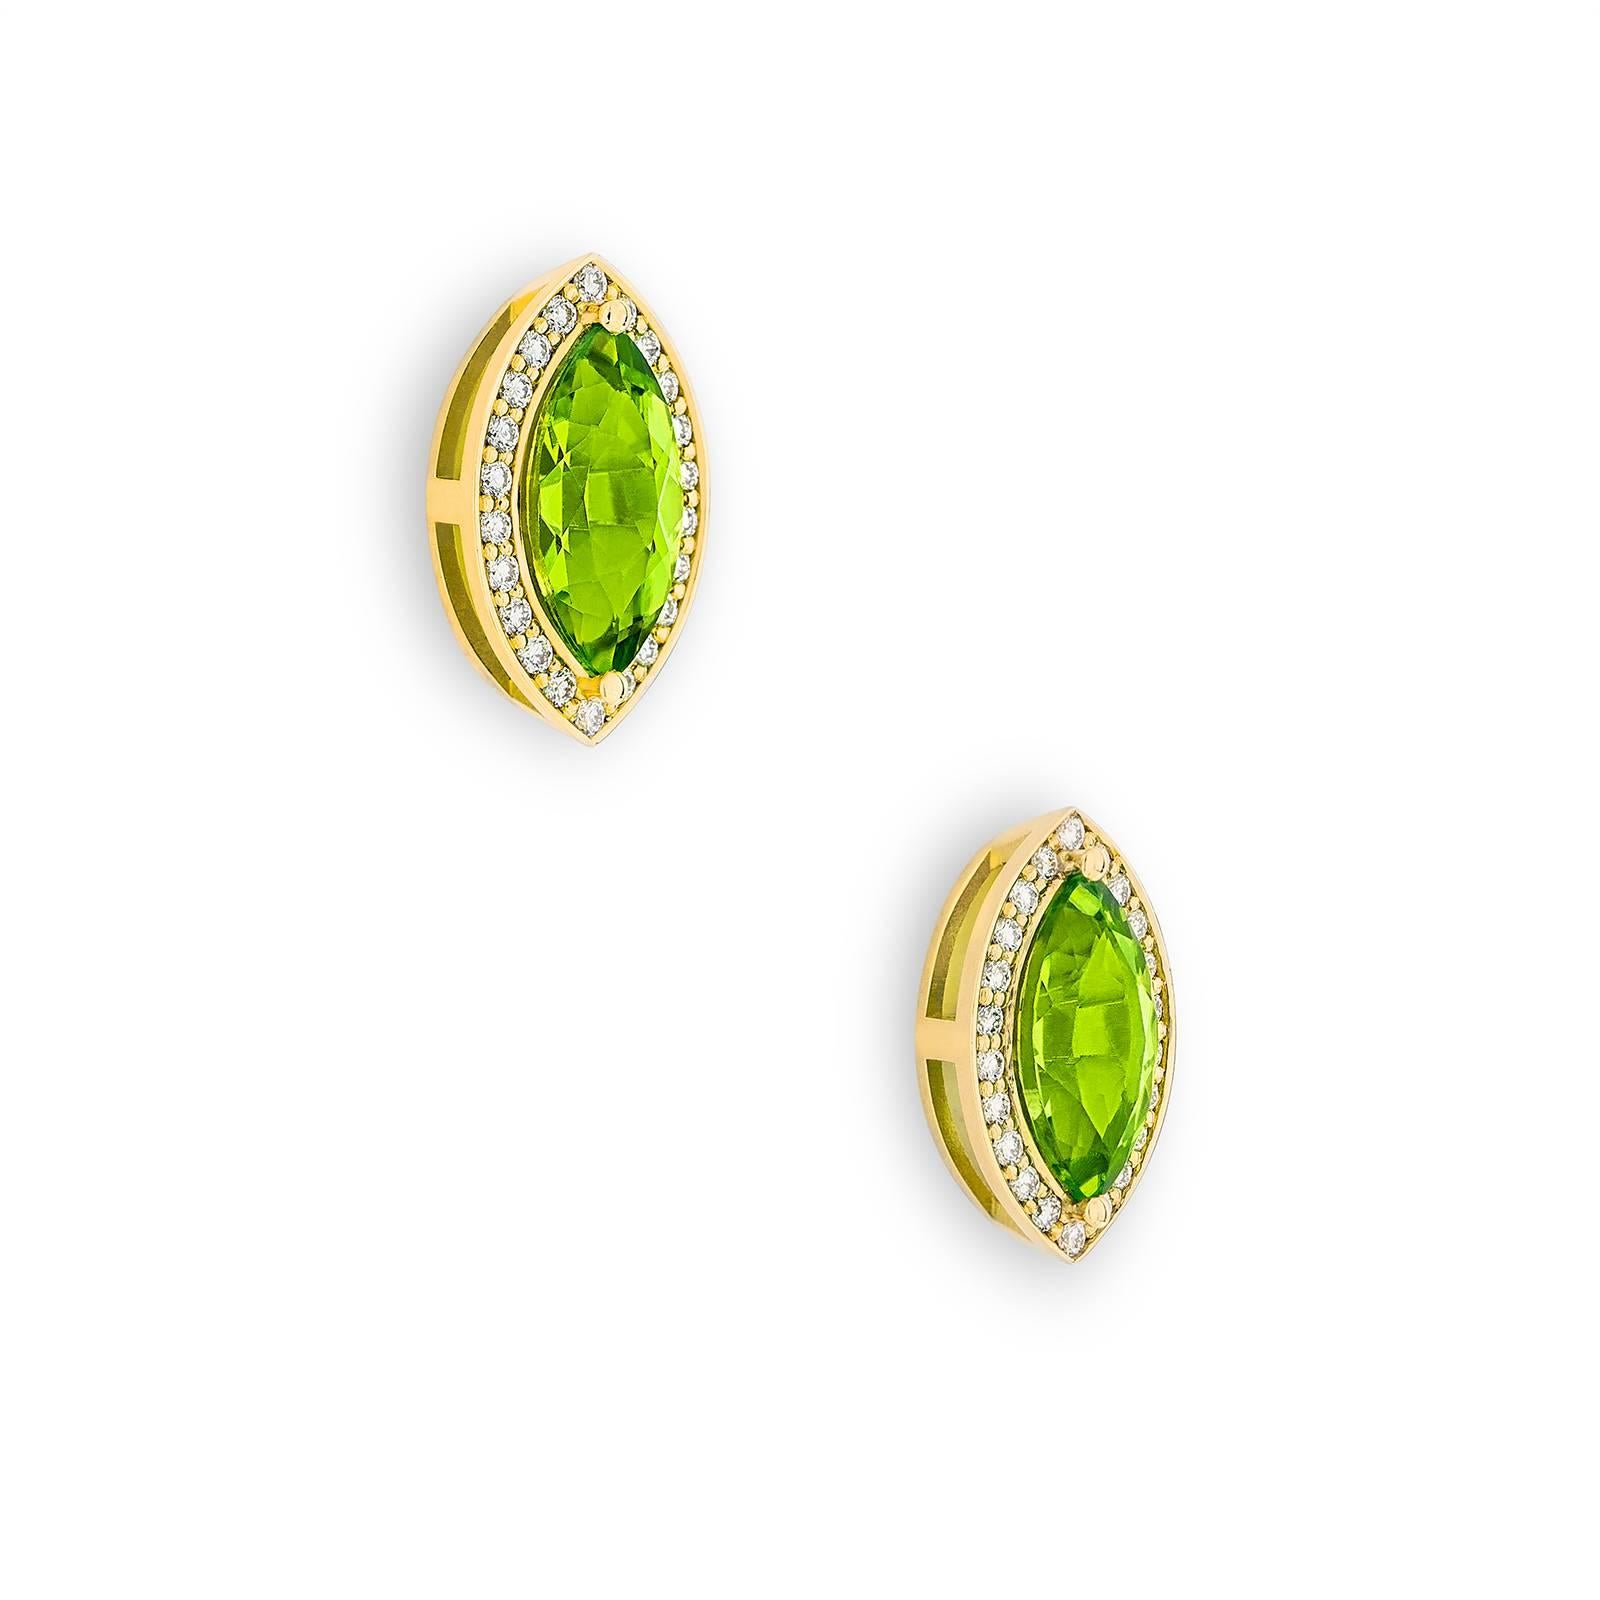 The Magnificent Green Studs are inspired by the vibrant feathers of the Magnificent Bird of Paradise. Set with 2.4 tct vivid green péridot surrounded by 0.1 tct natural pavé-set diamonds, these green studs are truly a coveted gift for any